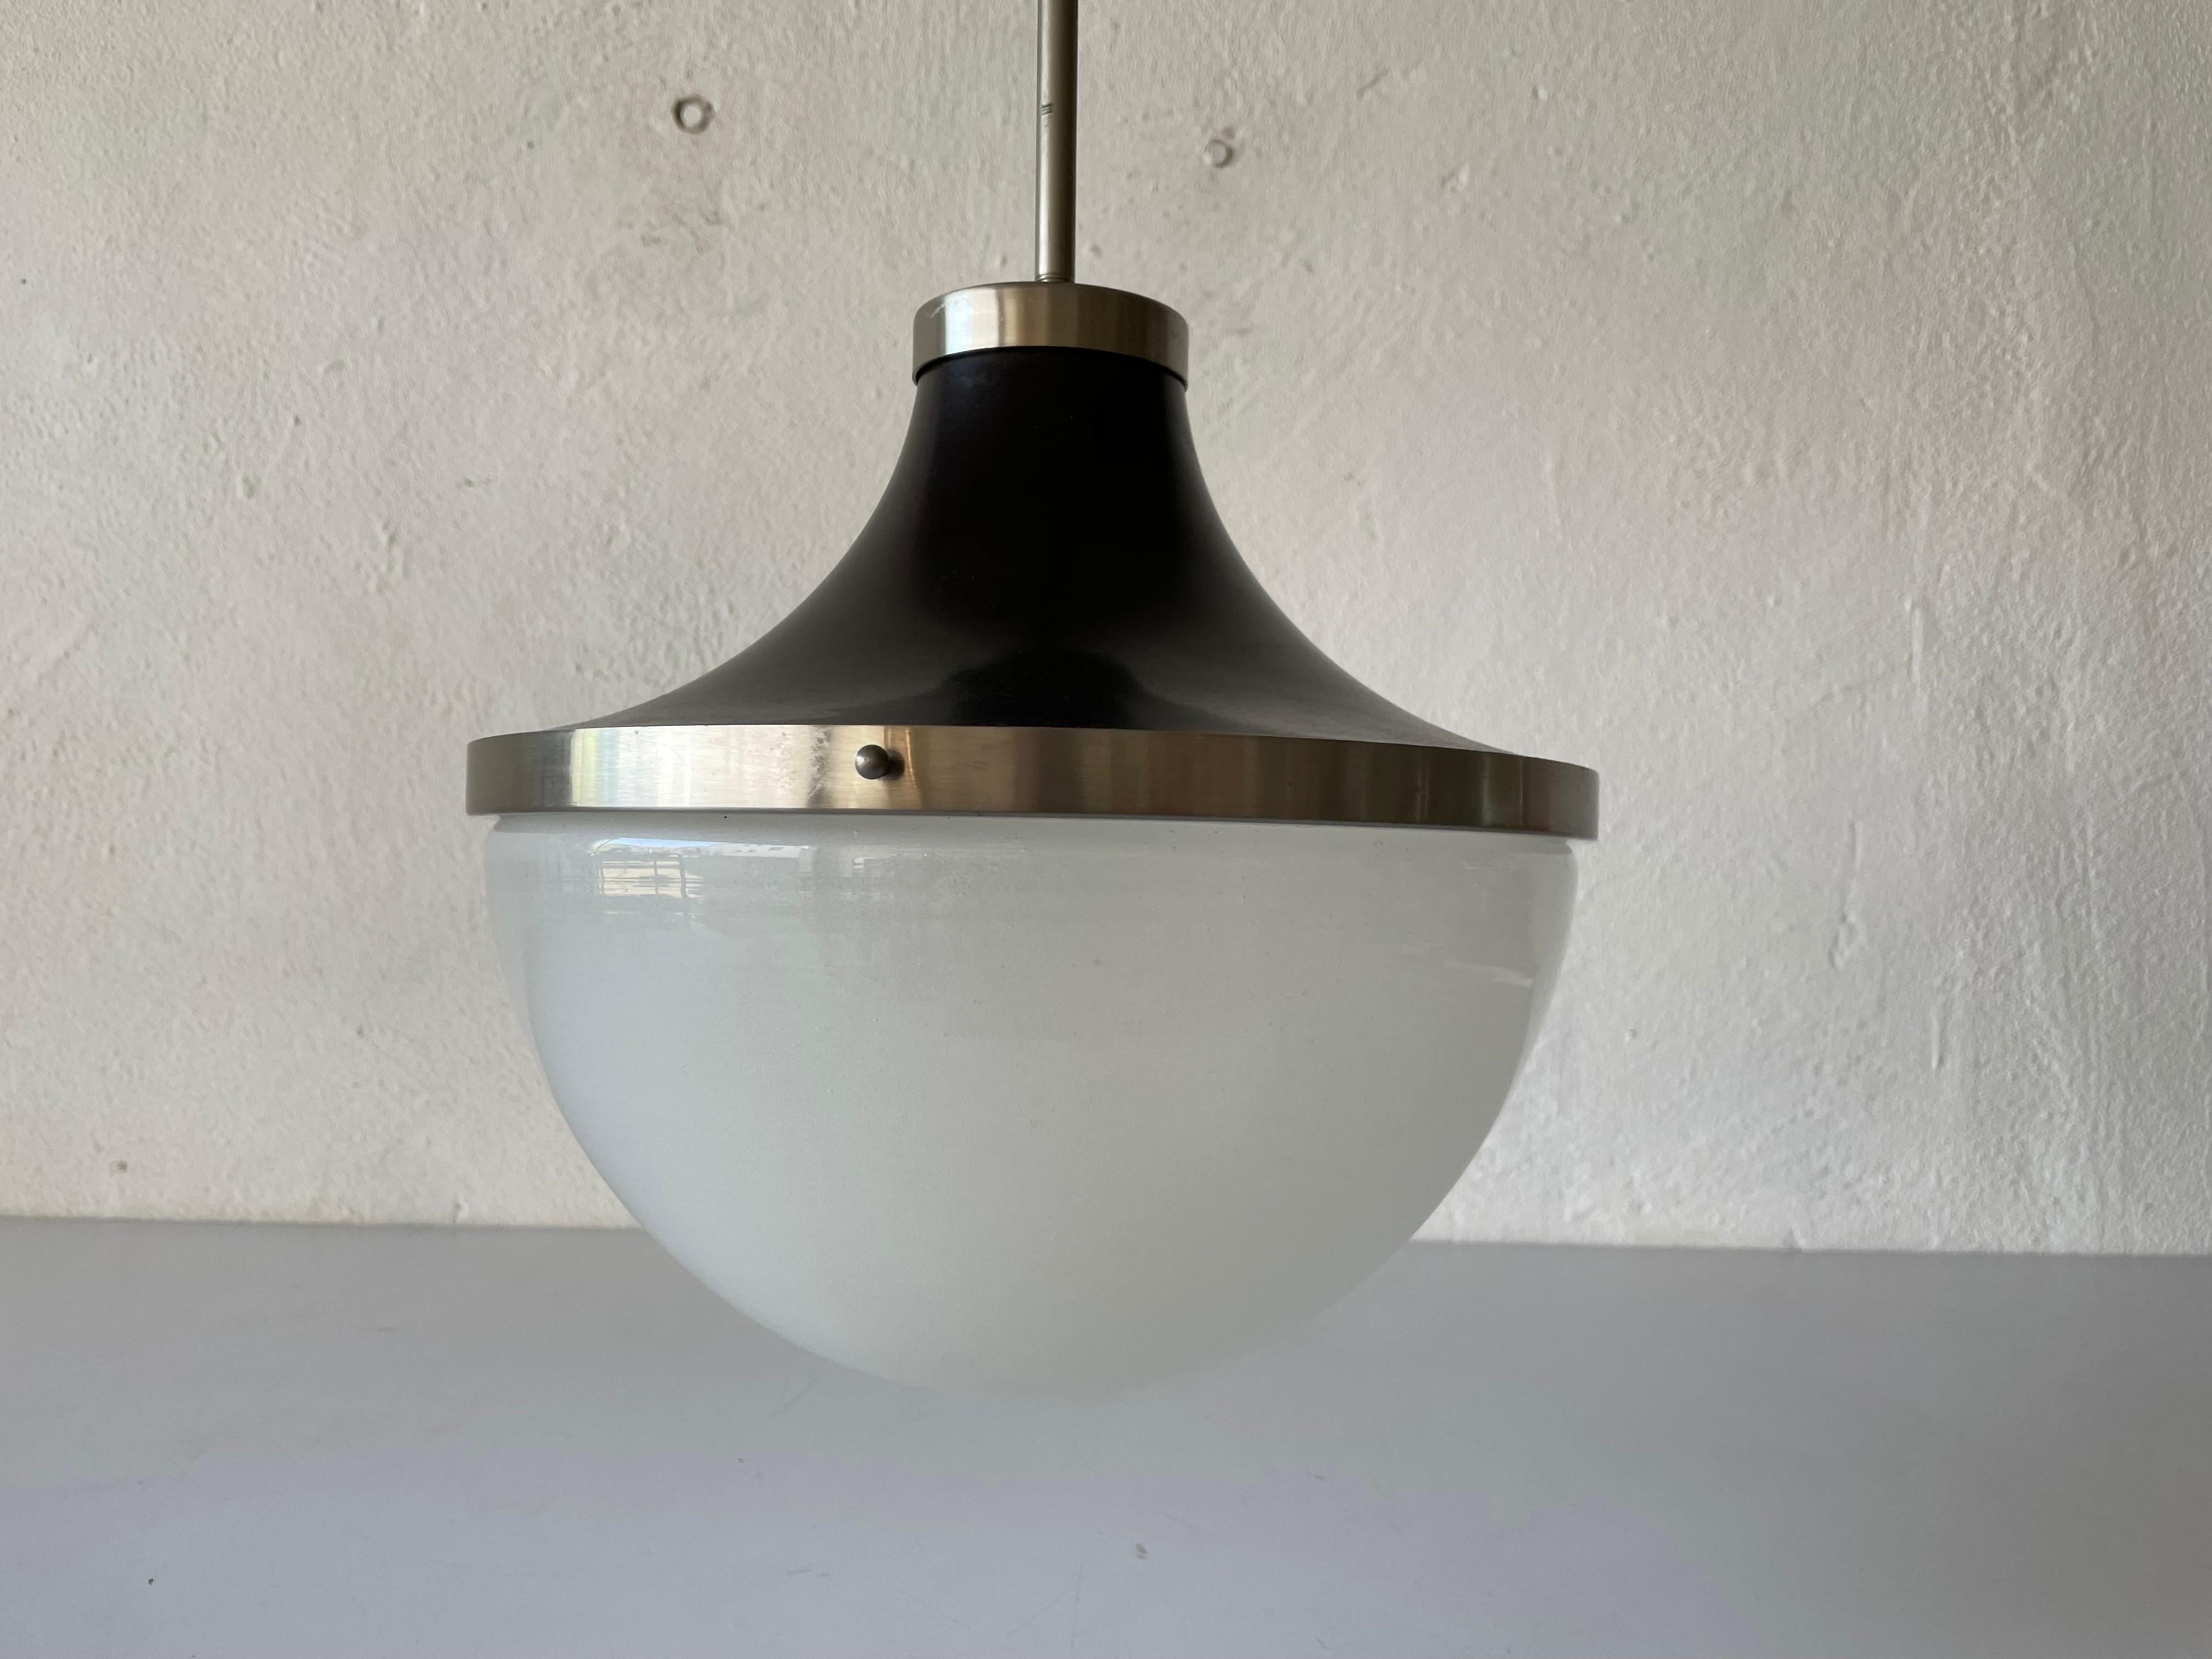 Picaro Model suspension light by Sergio Mazza for Artemide, 1960s, Italy

Lampshade is in very good vintage condition.
Original canopy.
Painted aluminum, raw aluminum and clear sandblasted glass.

This lamp works with E27 light bulb. Max